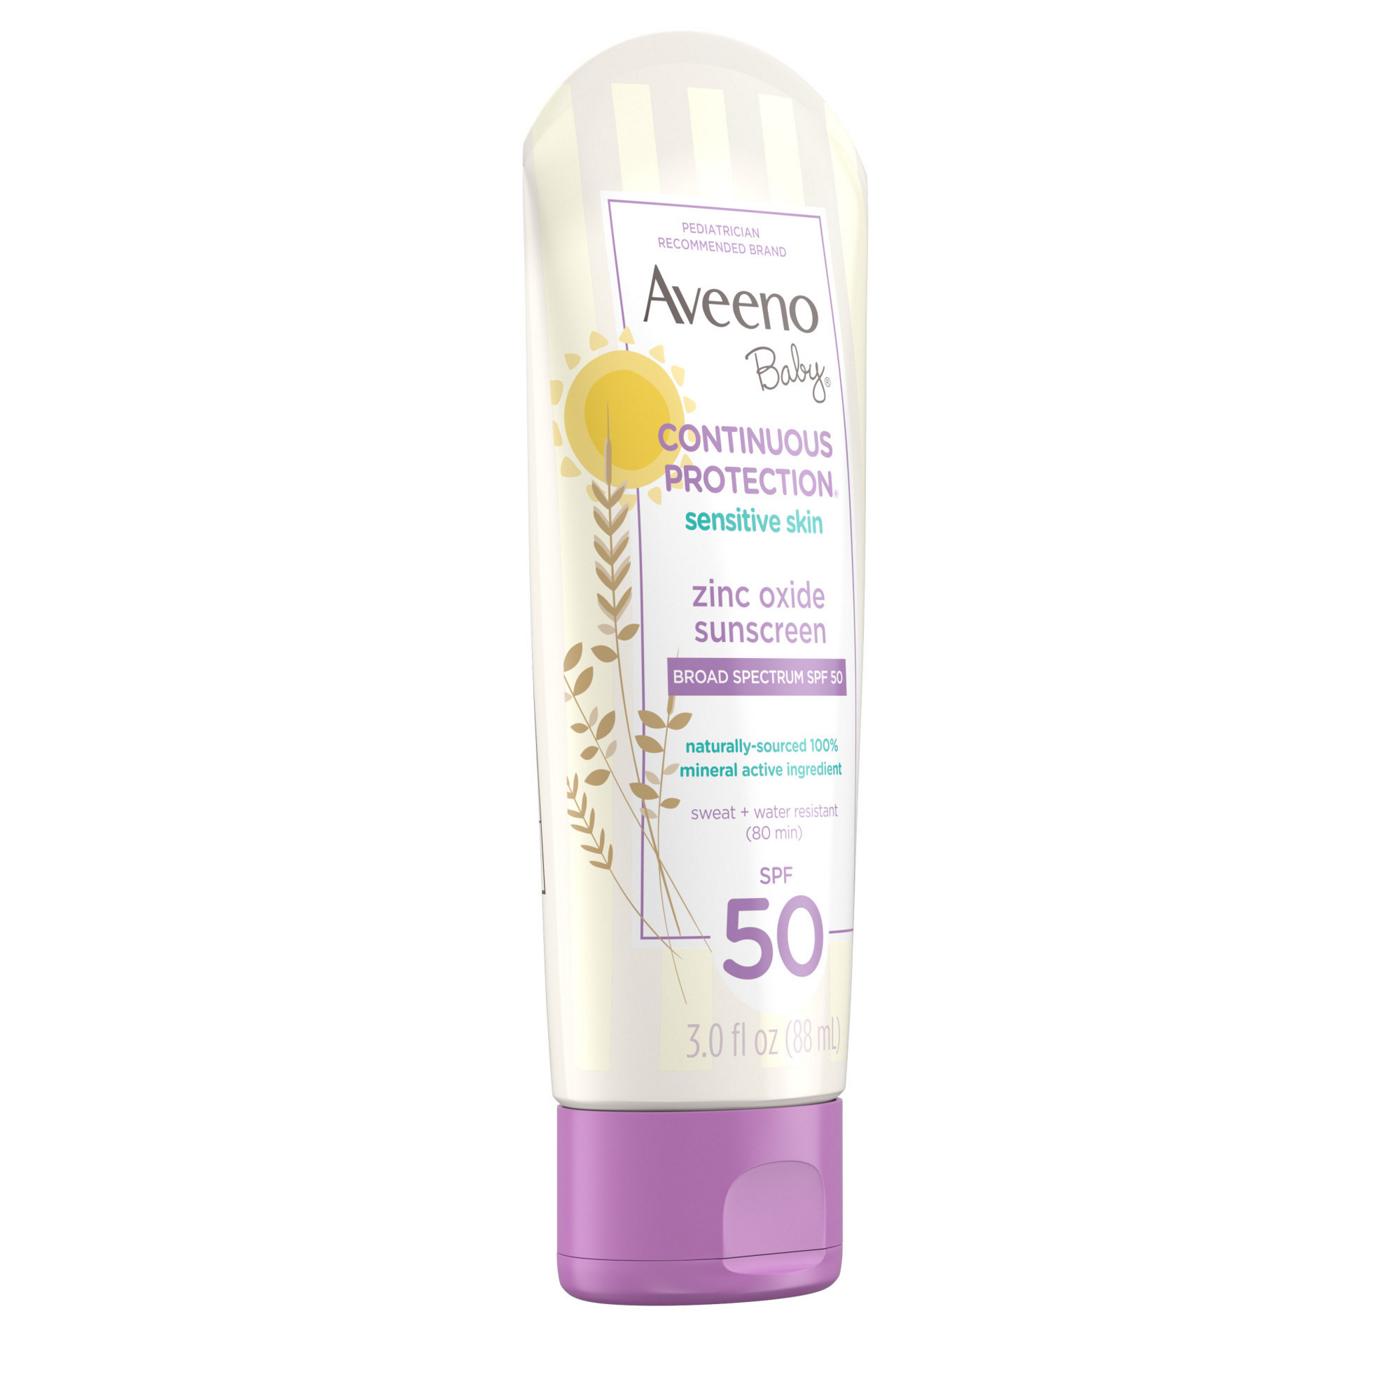 Aveeno Baby Continuous Protection Sensitive Skin Lotion Zinc Oxide Sunscreen With Broad Spectrum SPF 50; image 6 of 8